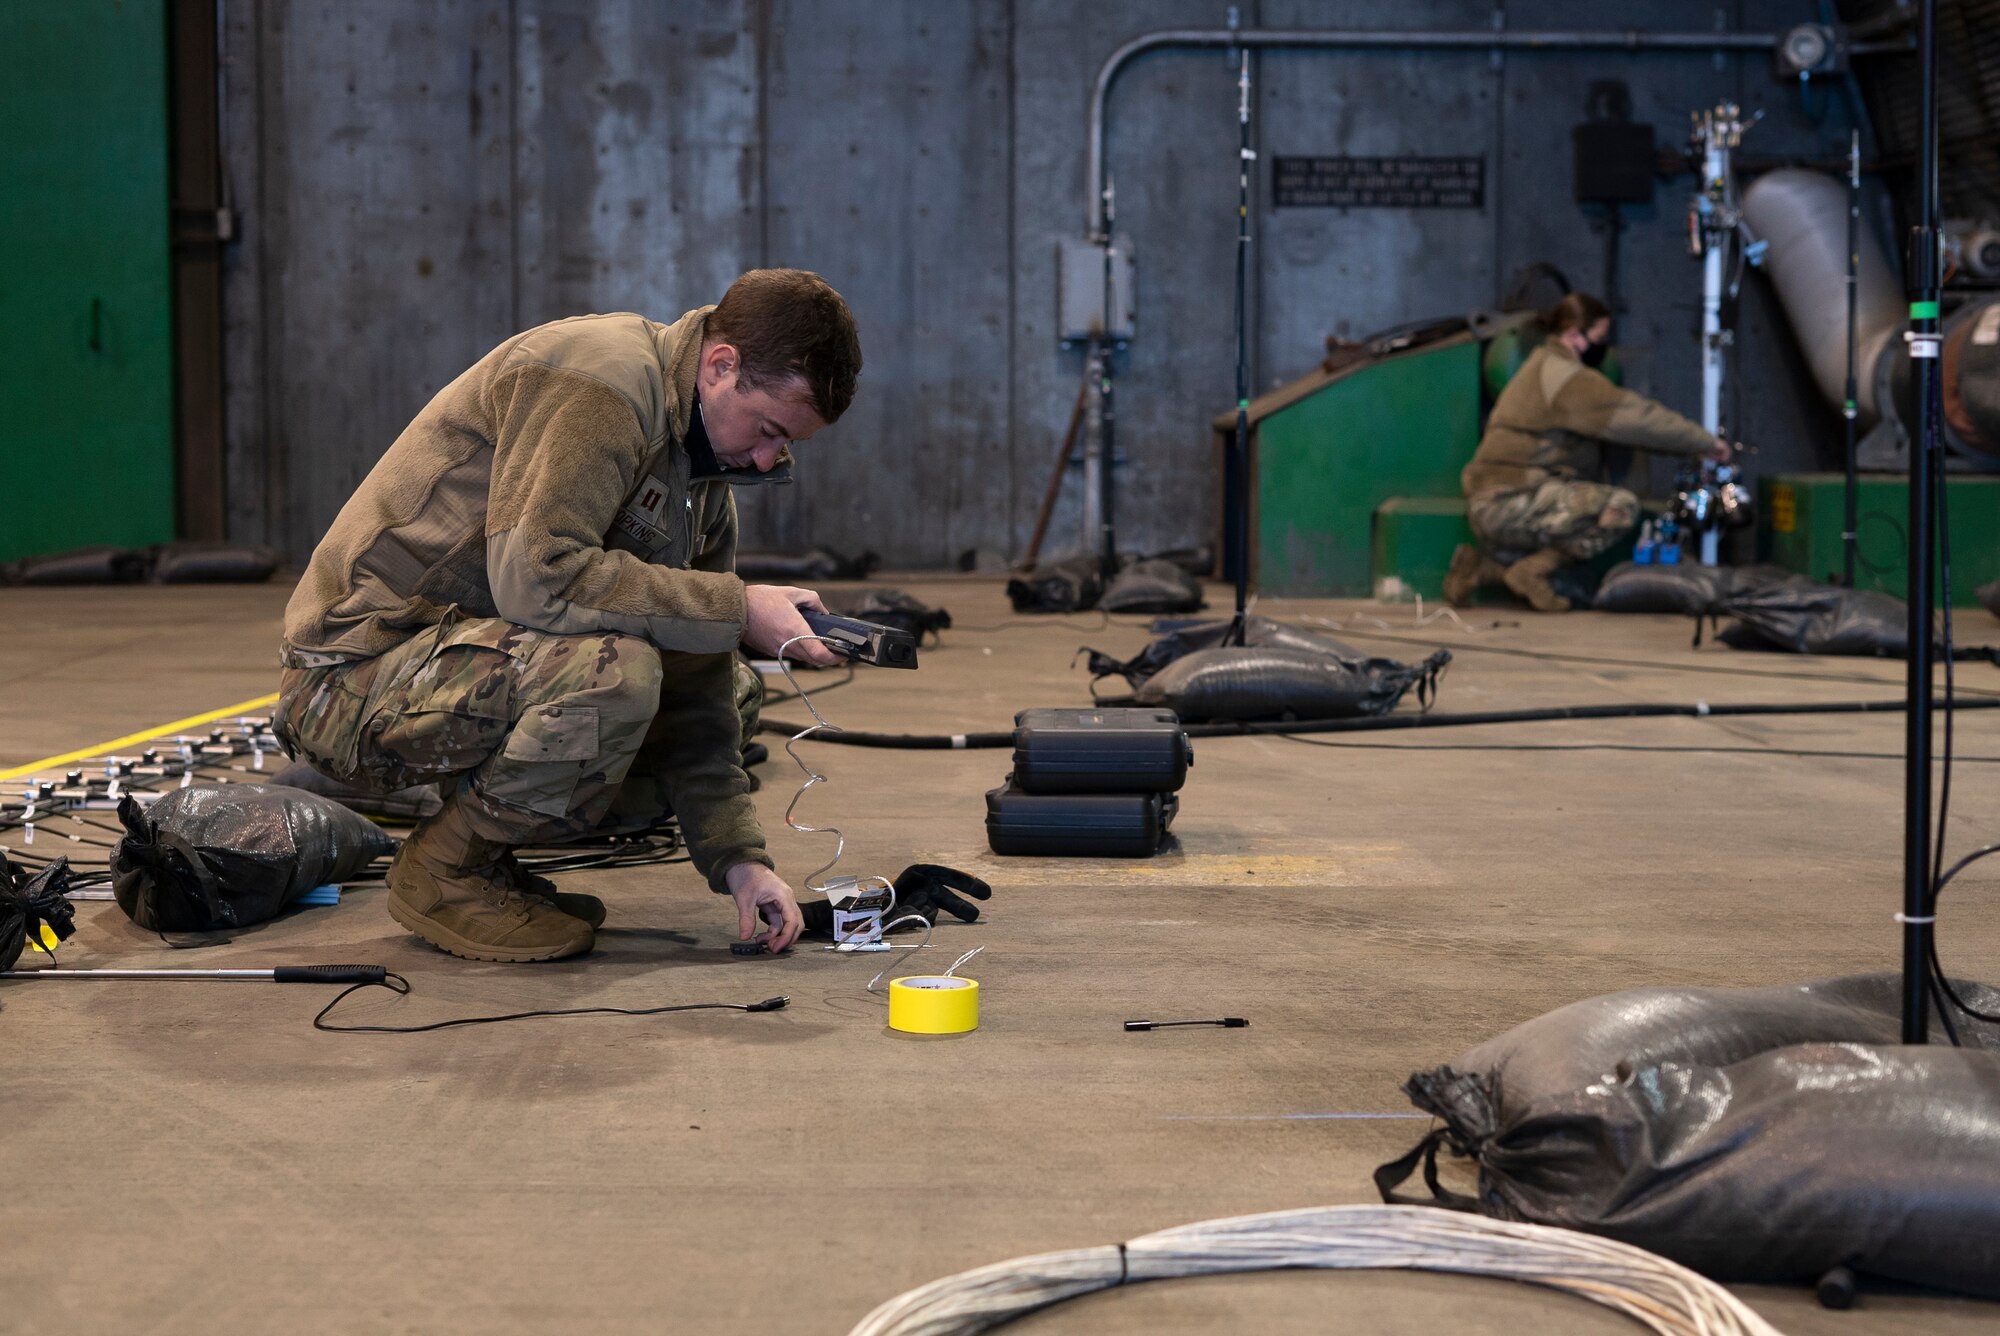 U.S. Air Force Capt. Christopher Hopkins, a systems sensory engineer and Tech Sgt. Katherine Harris, NCO in-charge of hazard recognition, both stationed at Wright-Patterson Air Force Base, Ohio, calibrate monitoring devices prior to an F-35A Lightning II acoustic and emission test at Royal Air Force Lakenheath, England, May 4, 2021. The data collected during testing will be used to ensure that the acoustic load inside the protective aircraft shelter is not exceeded, therefore preventing structural fatigue to the aircraft and ensuring a safe work environment. (U.S. Air Force photo by Senior Airman Jessi Monte)